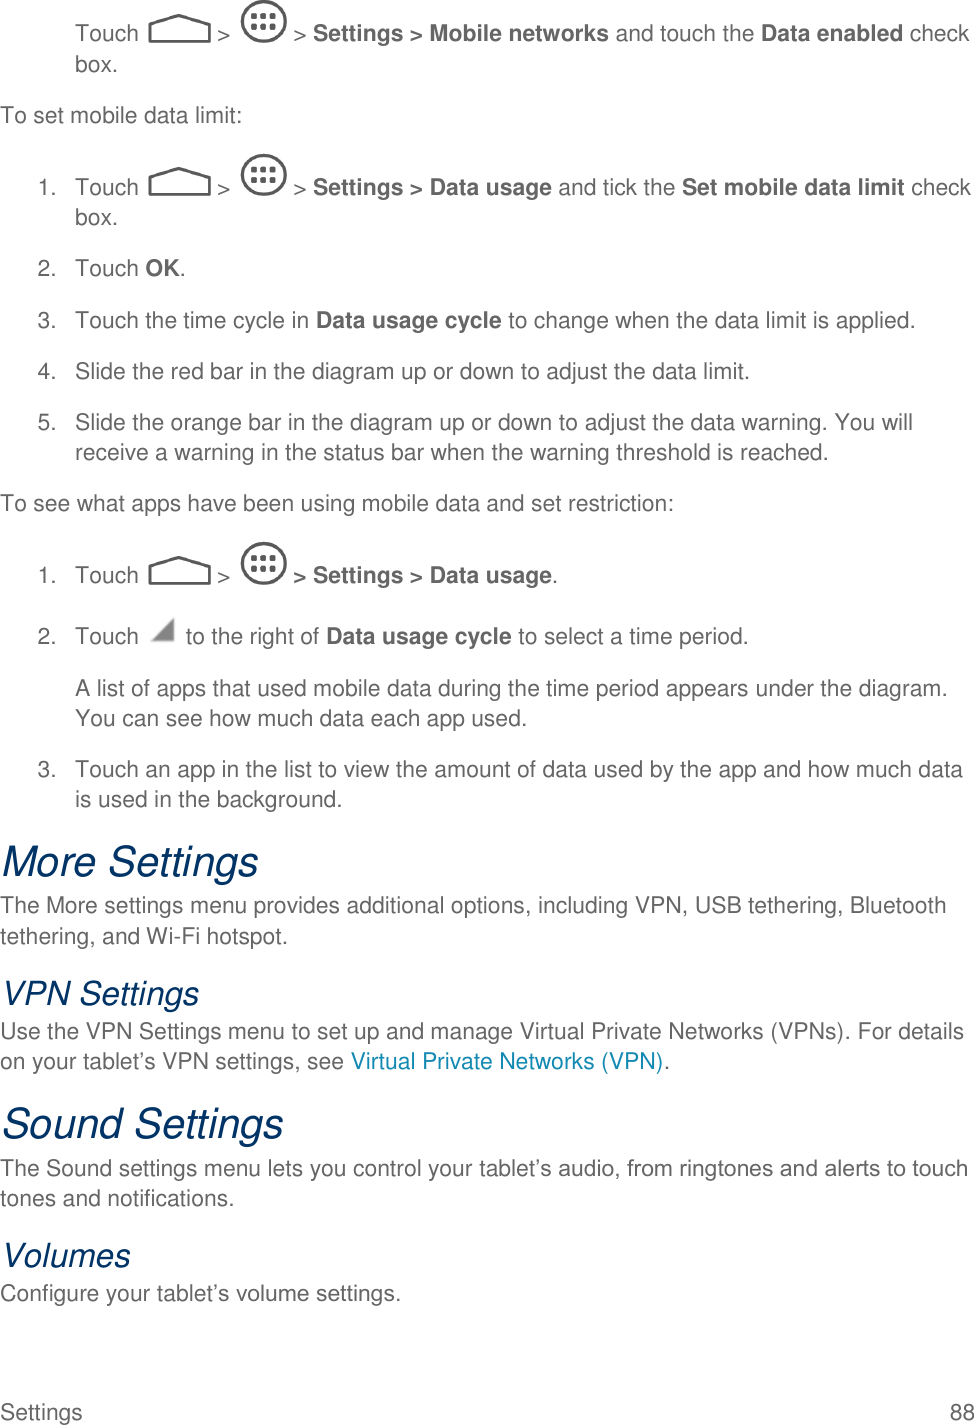  Settings  88 Touch   &gt;   &gt; Settings &gt; Mobile networks and touch the Data enabled check box. To set mobile data limit: 1.  Touch   &gt;   &gt; Settings &gt; Data usage and tick the Set mobile data limit check box. 2.  Touch OK. 3.  Touch the time cycle in Data usage cycle to change when the data limit is applied. 4.  Slide the red bar in the diagram up or down to adjust the data limit. 5.  Slide the orange bar in the diagram up or down to adjust the data warning. You will receive a warning in the status bar when the warning threshold is reached. To see what apps have been using mobile data and set restriction: 1.  Touch   &gt;   &gt; Settings &gt; Data usage. 2.  Touch   to the right of Data usage cycle to select a time period. A list of apps that used mobile data during the time period appears under the diagram. You can see how much data each app used. 3.  Touch an app in the list to view the amount of data used by the app and how much data is used in the background. More Settings The More settings menu provides additional options, including VPN, USB tethering, Bluetooth tethering, and Wi-Fi hotspot. VPN Settings Use the VPN Settings menu to set up and manage Virtual Private Networks (VPNs). For details on your tablet’s VPN settings, see Virtual Private Networks (VPN). Sound Settings The Sound settings menu lets you control your tablet’s audio, from ringtones and alerts to touch tones and notifications. Volumes Configure your tablet’s volume settings. 